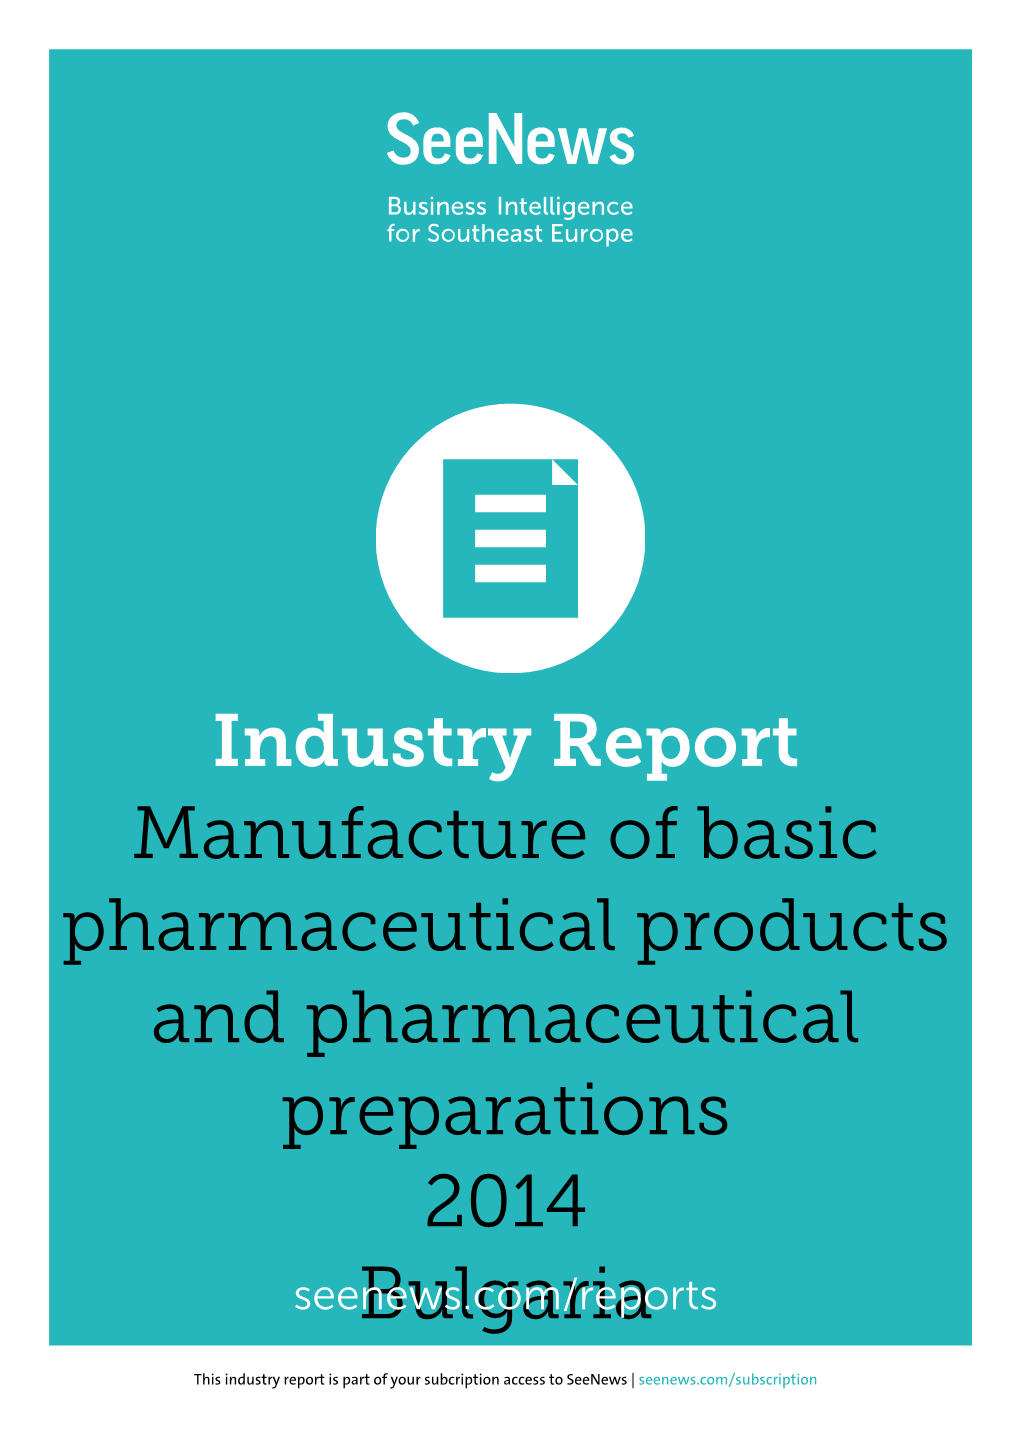 Industry Report Manufacture of Basic Pharmaceutical Products and Pharmaceutical Preparations 2014 Seenews.Com/Reportsbulgaria